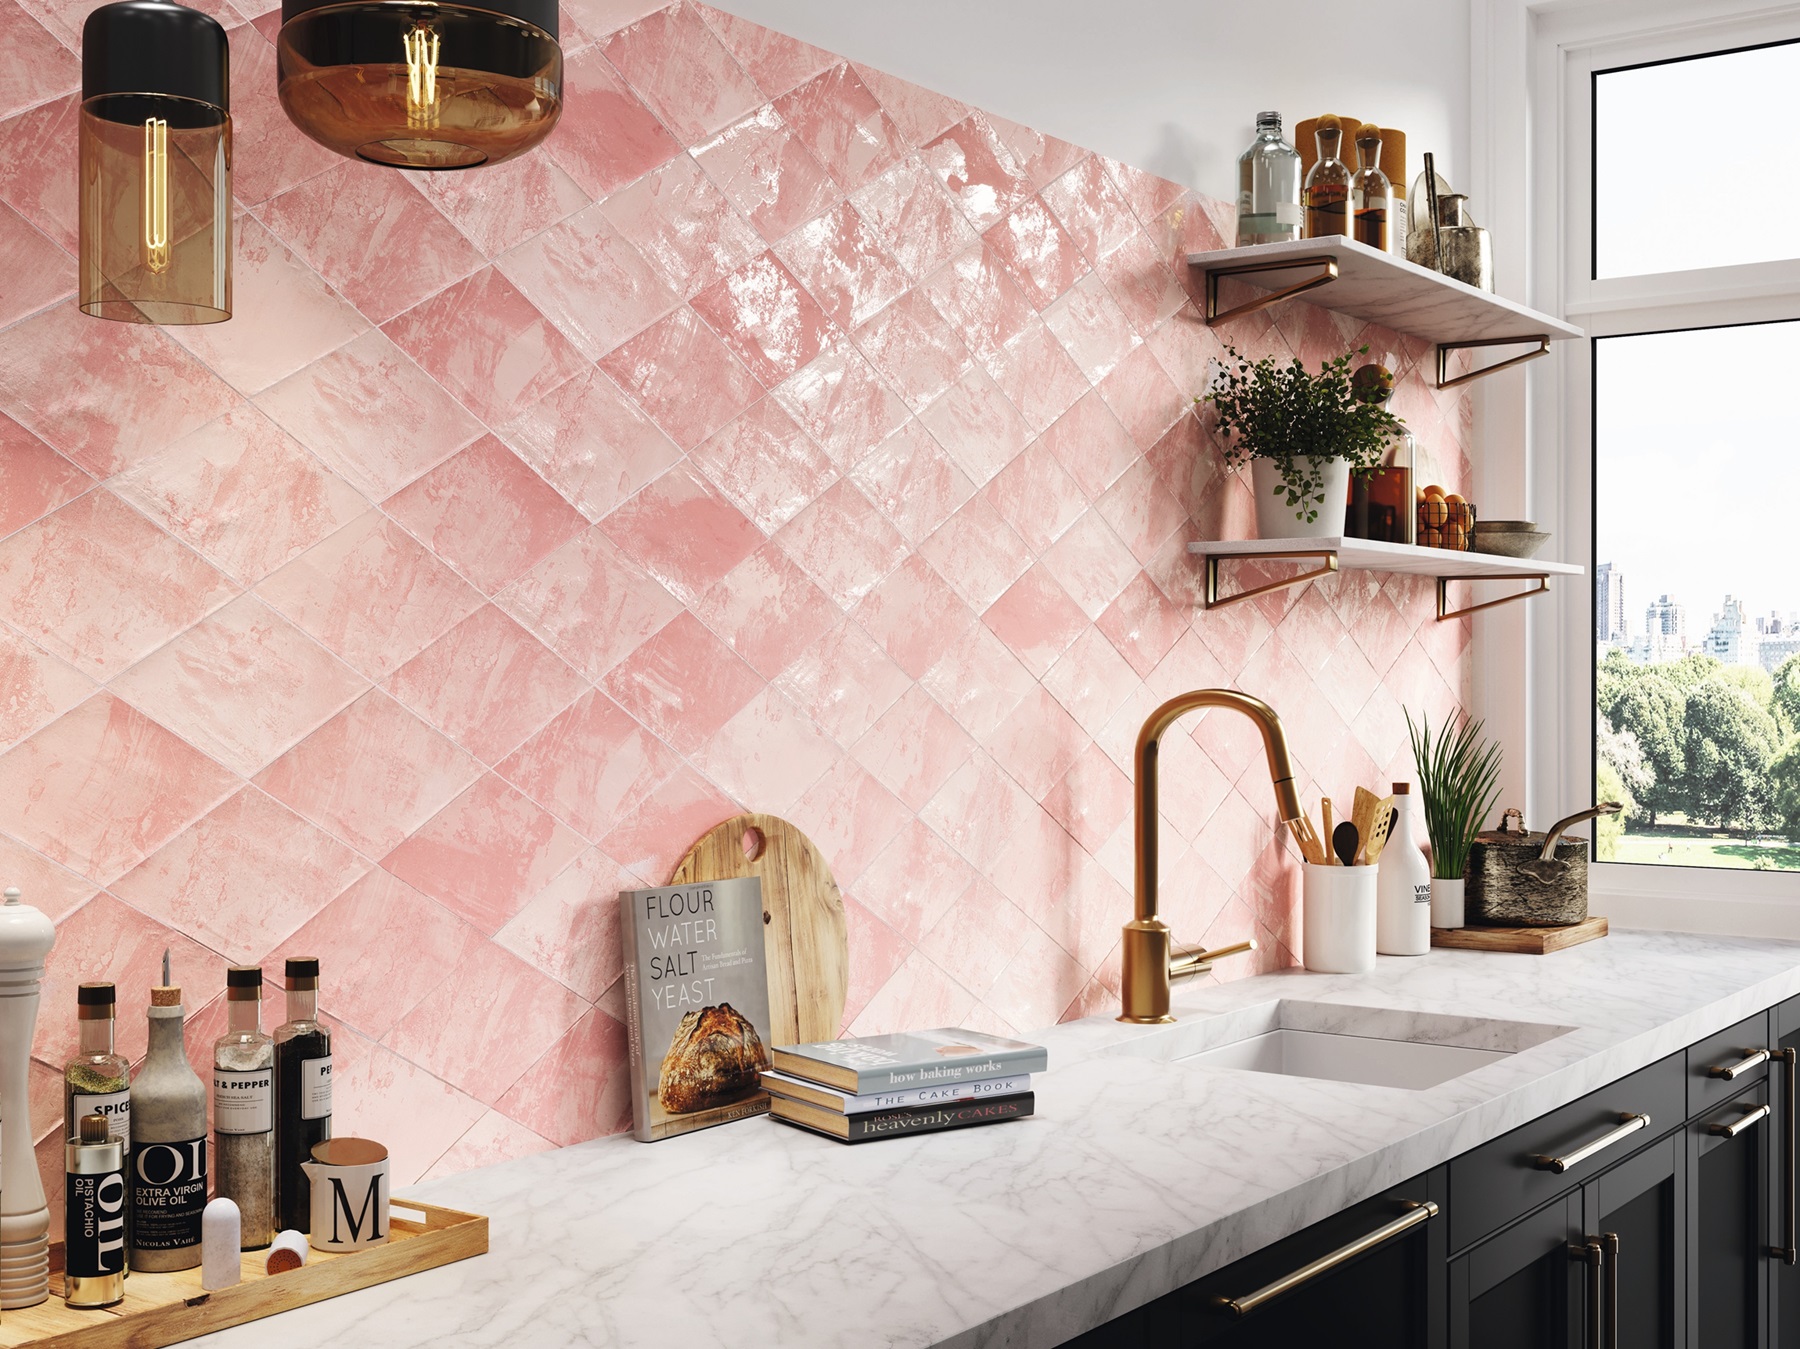 pink tiles on a kitchen wall. There are bottles on the countertop and a sink with modern brass taps.